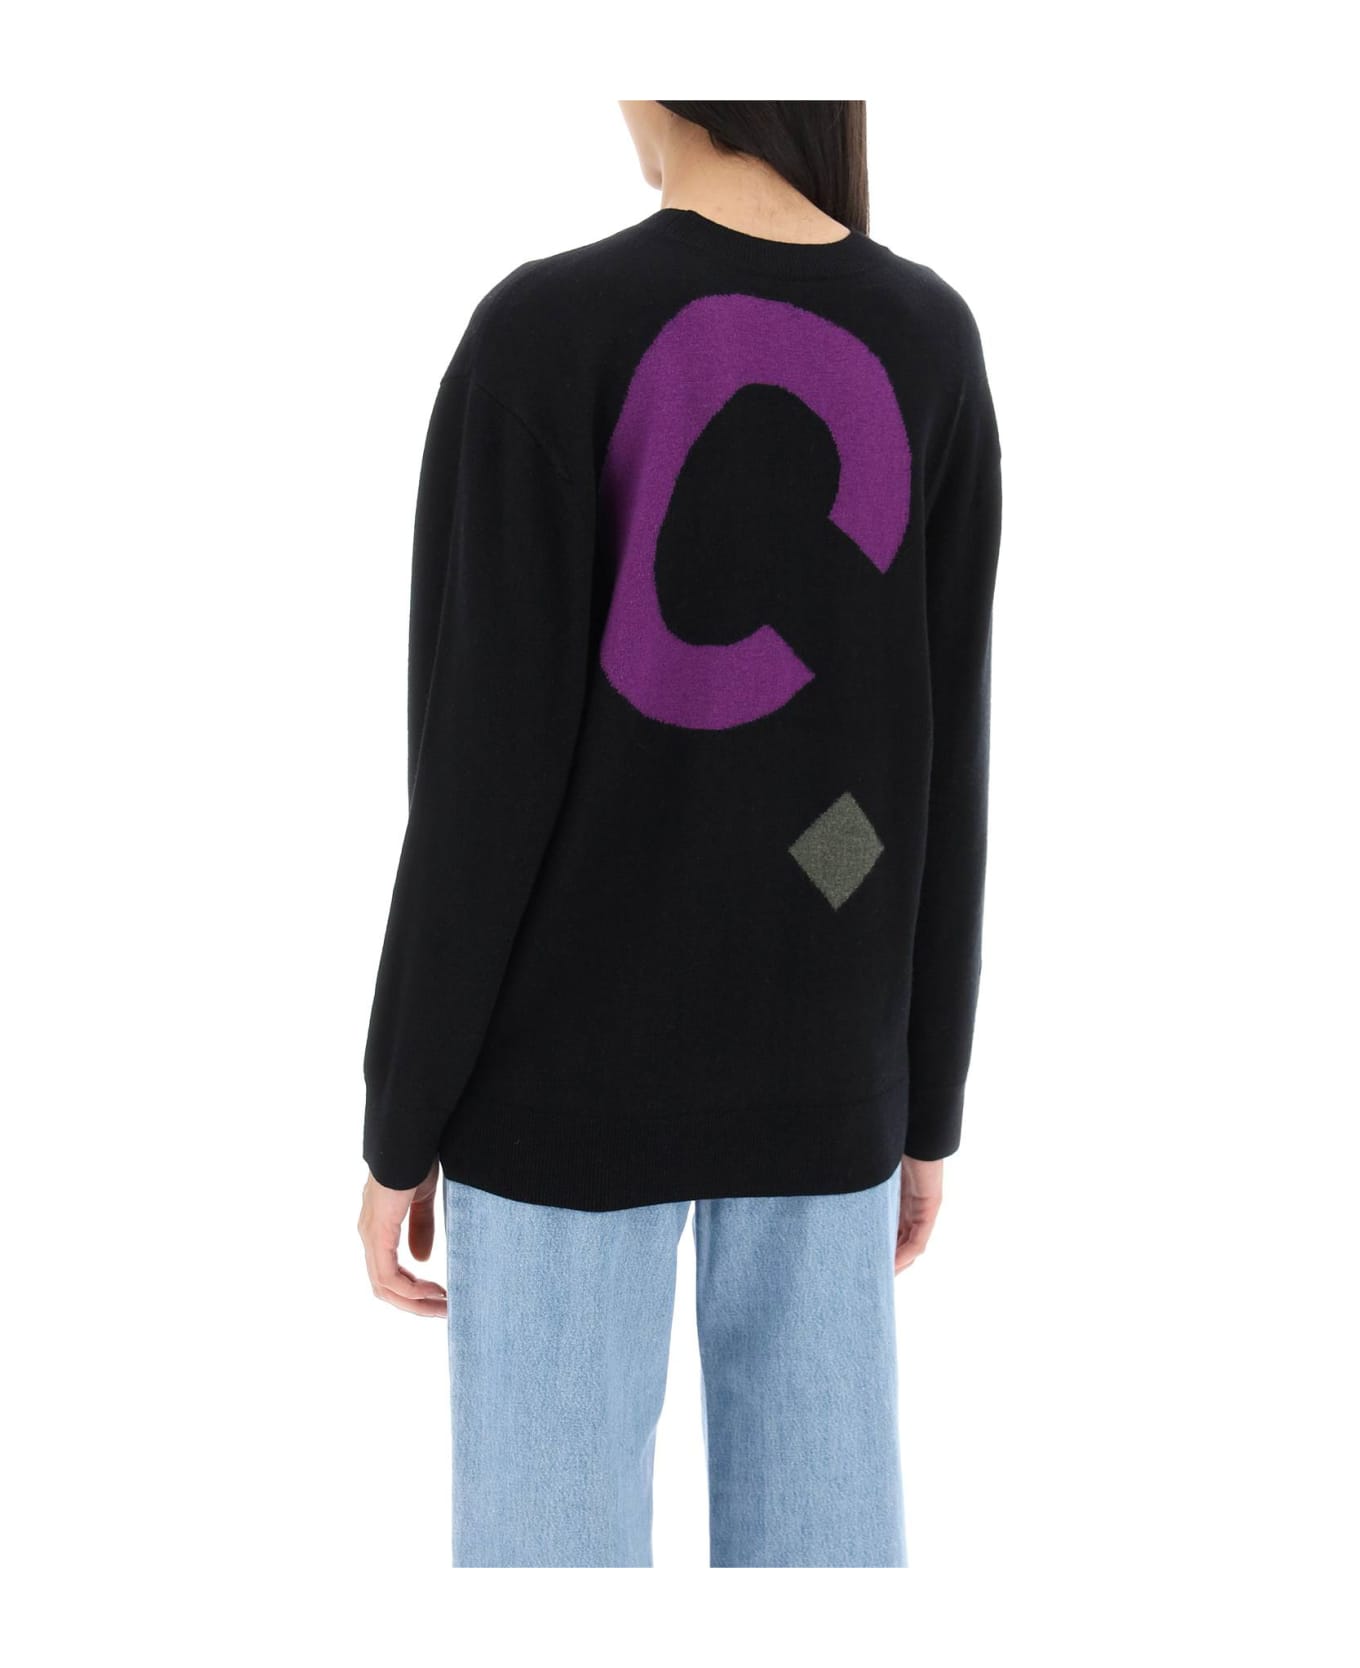 A.P.C. Logo All Over F Sweater - BLACK